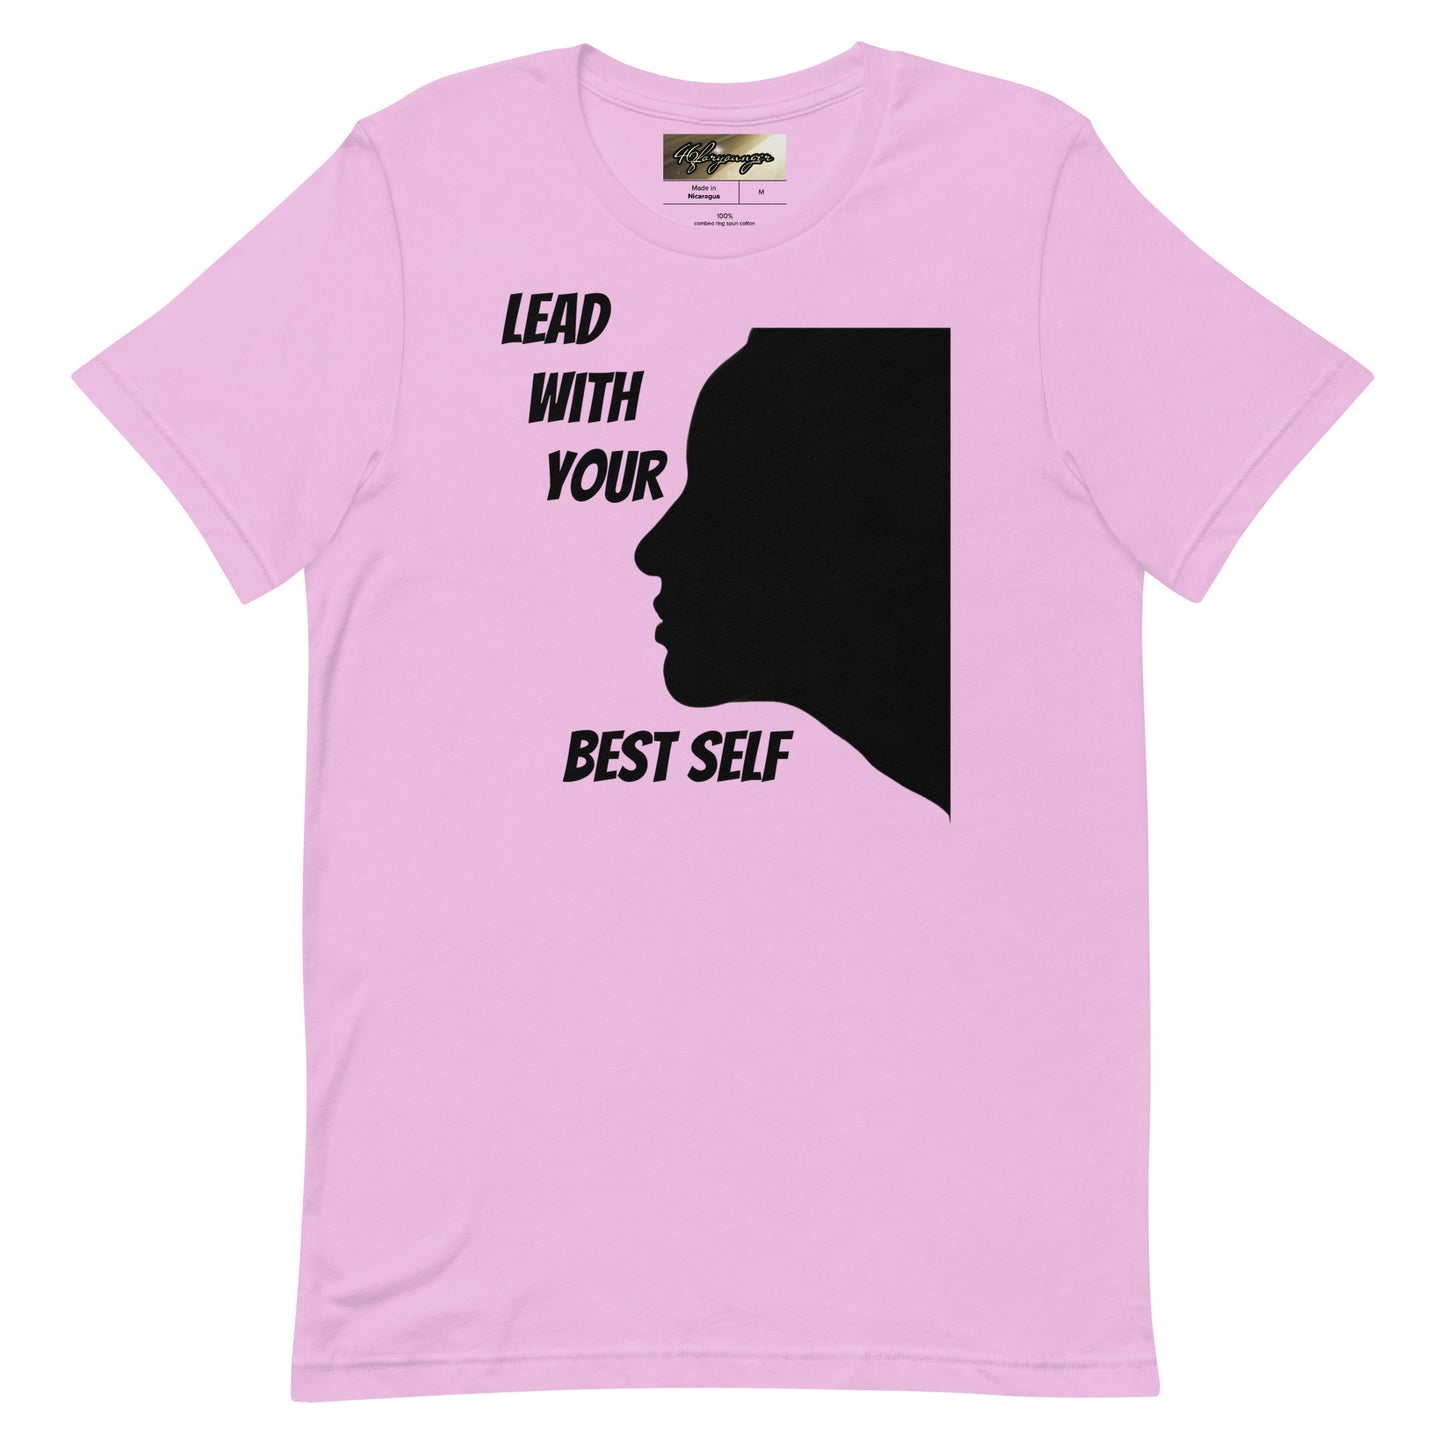 LBS Unisex Colored T-Shirt